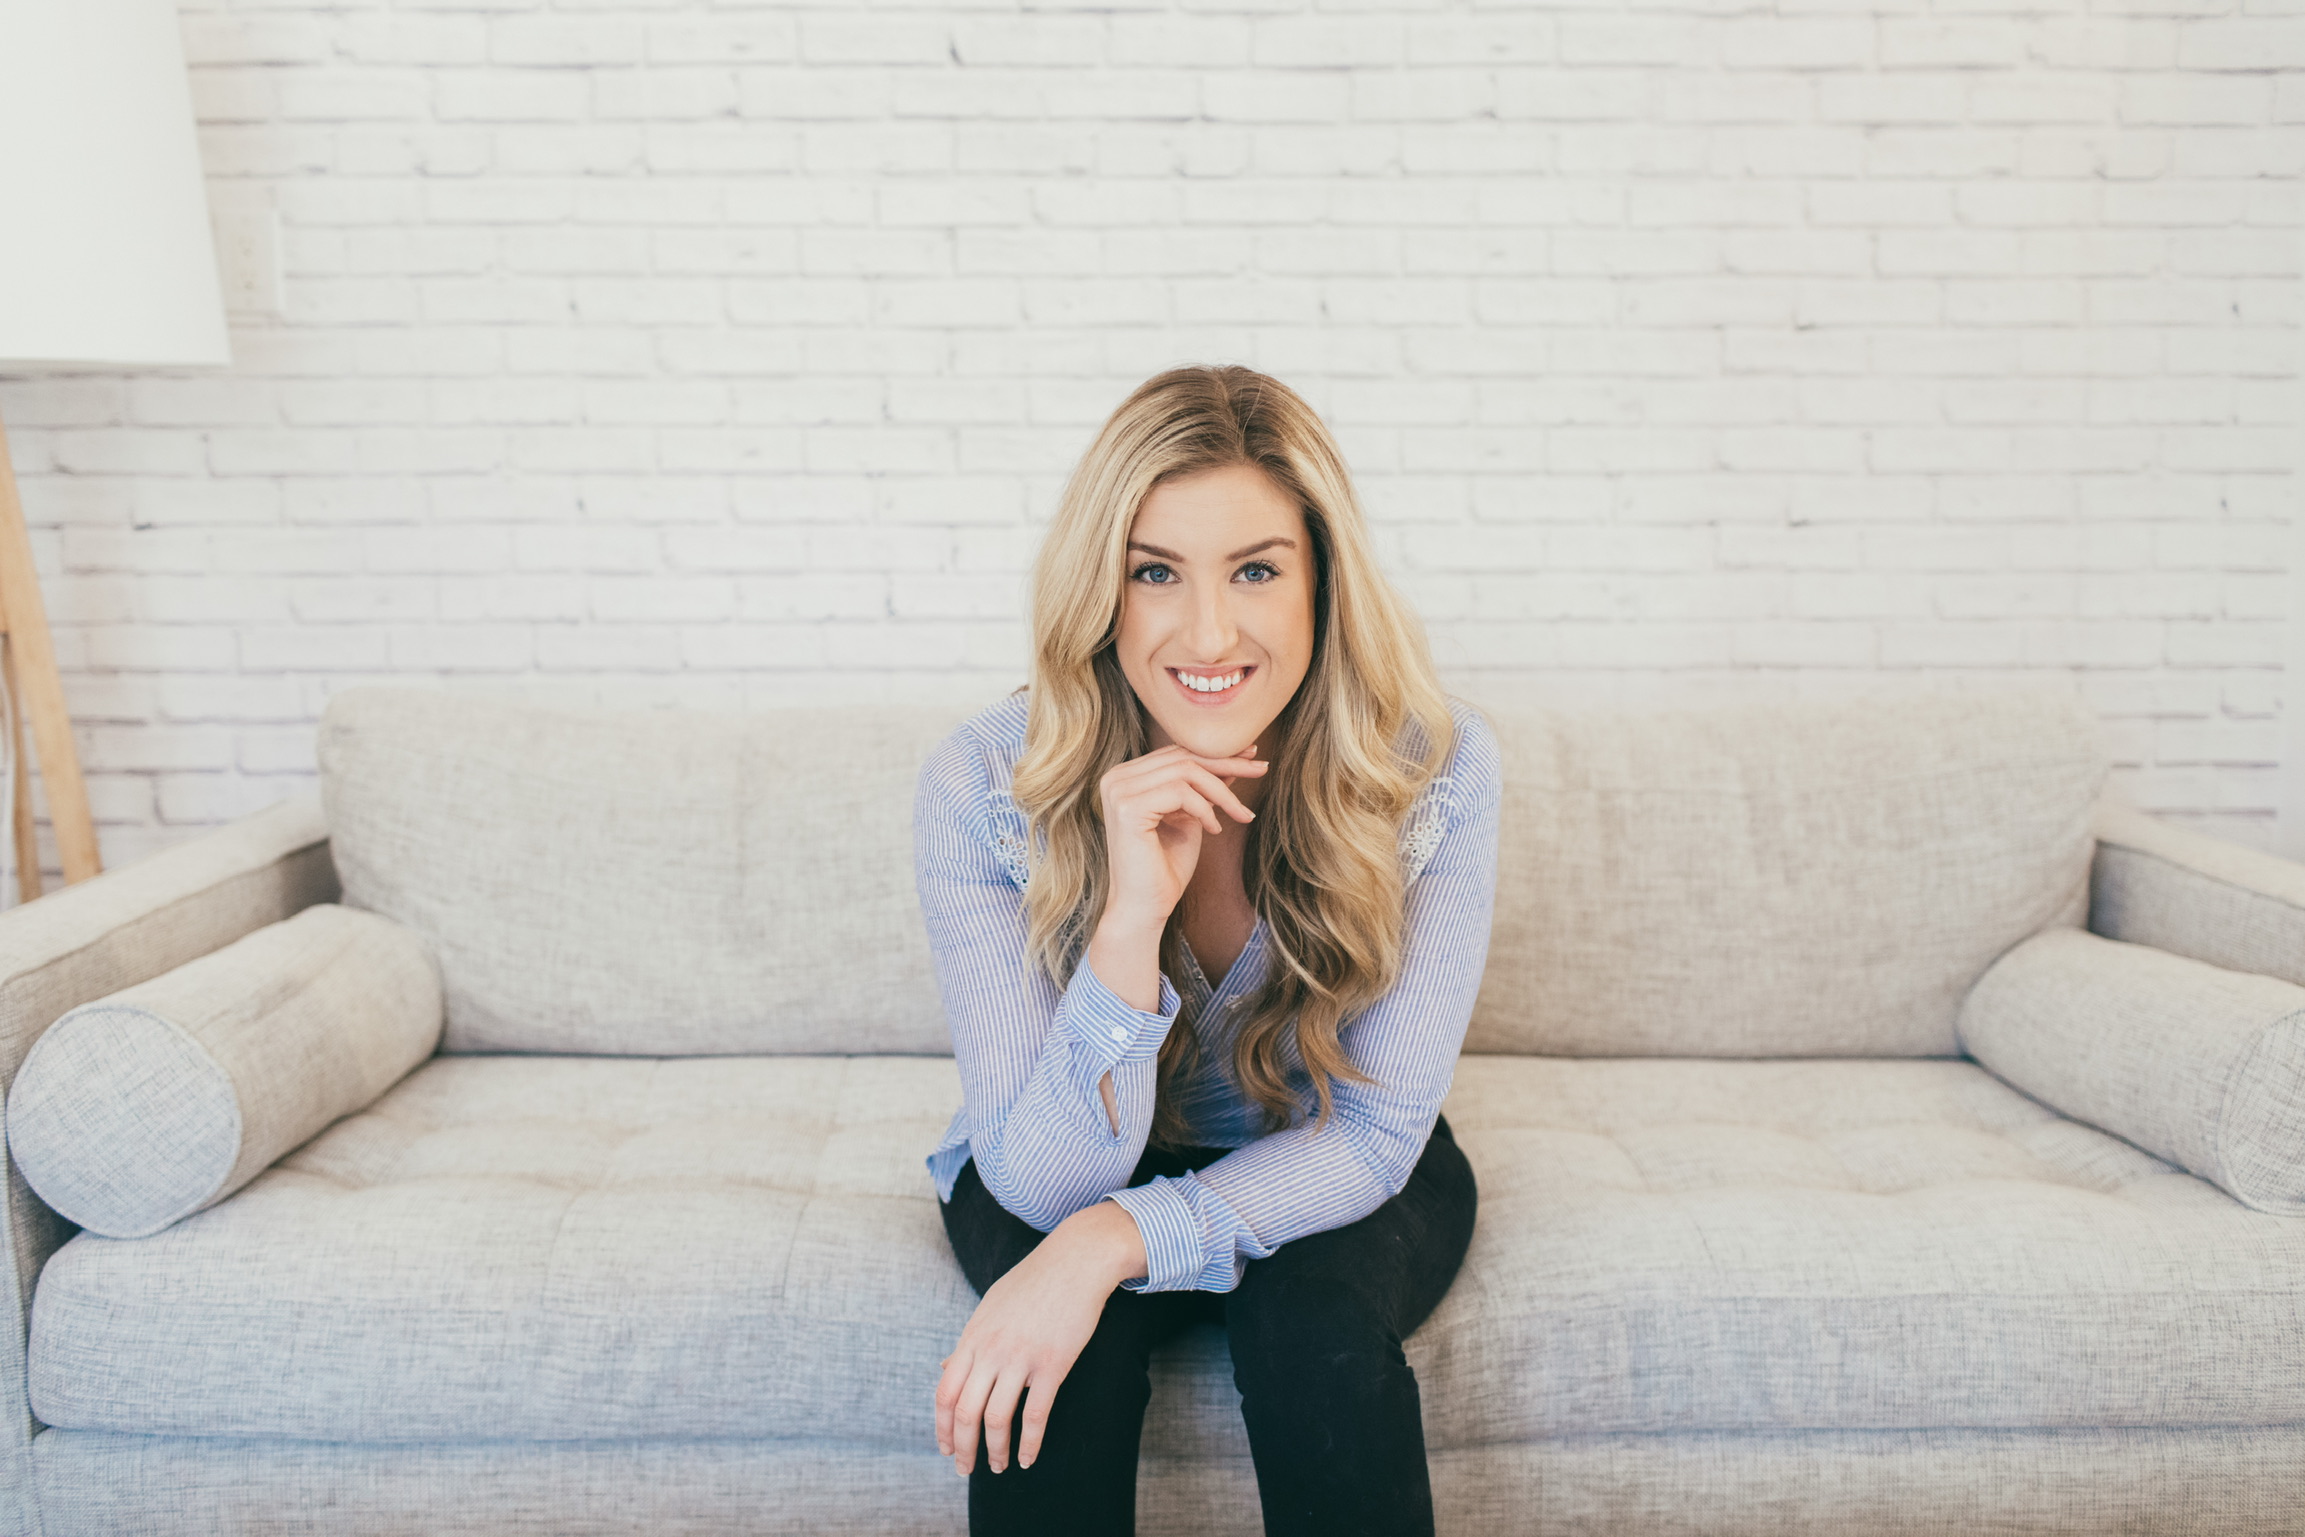 Photo of Meg Gaic, founder of Get Glow sitting on couch smiling at camera